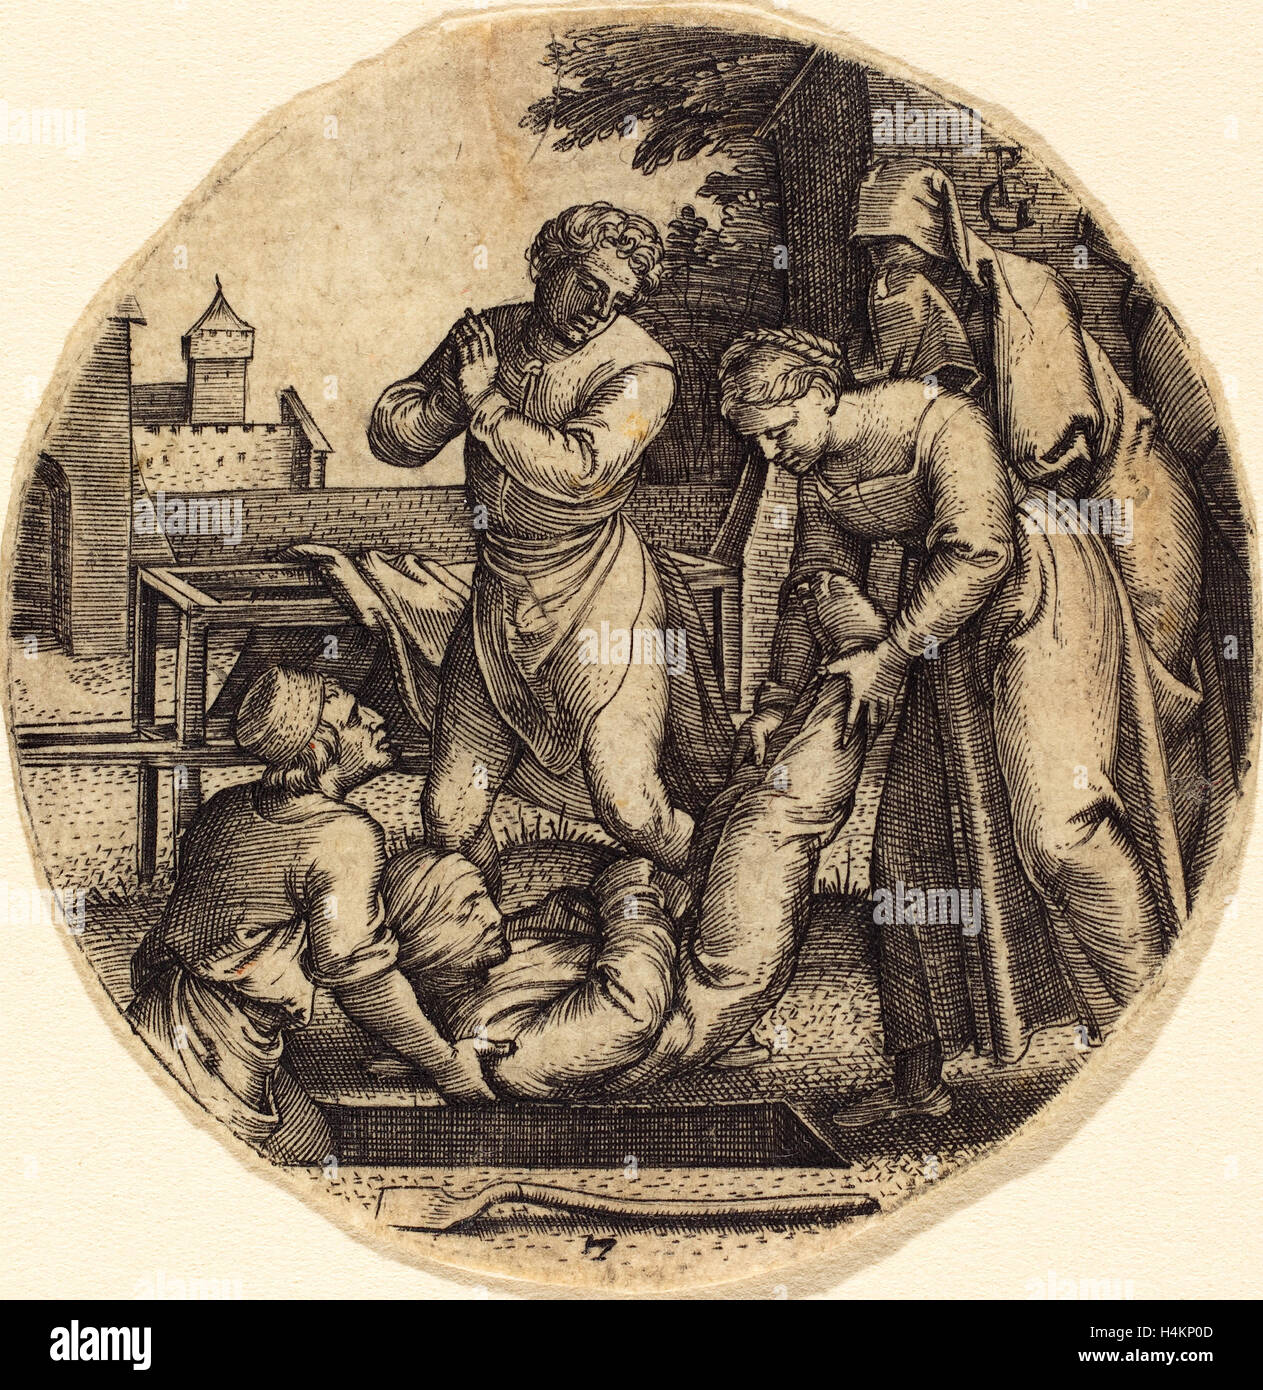 Georg Pencz (German, c. 1500 - 1550), To Bury the Dead, engraving Stock Photo